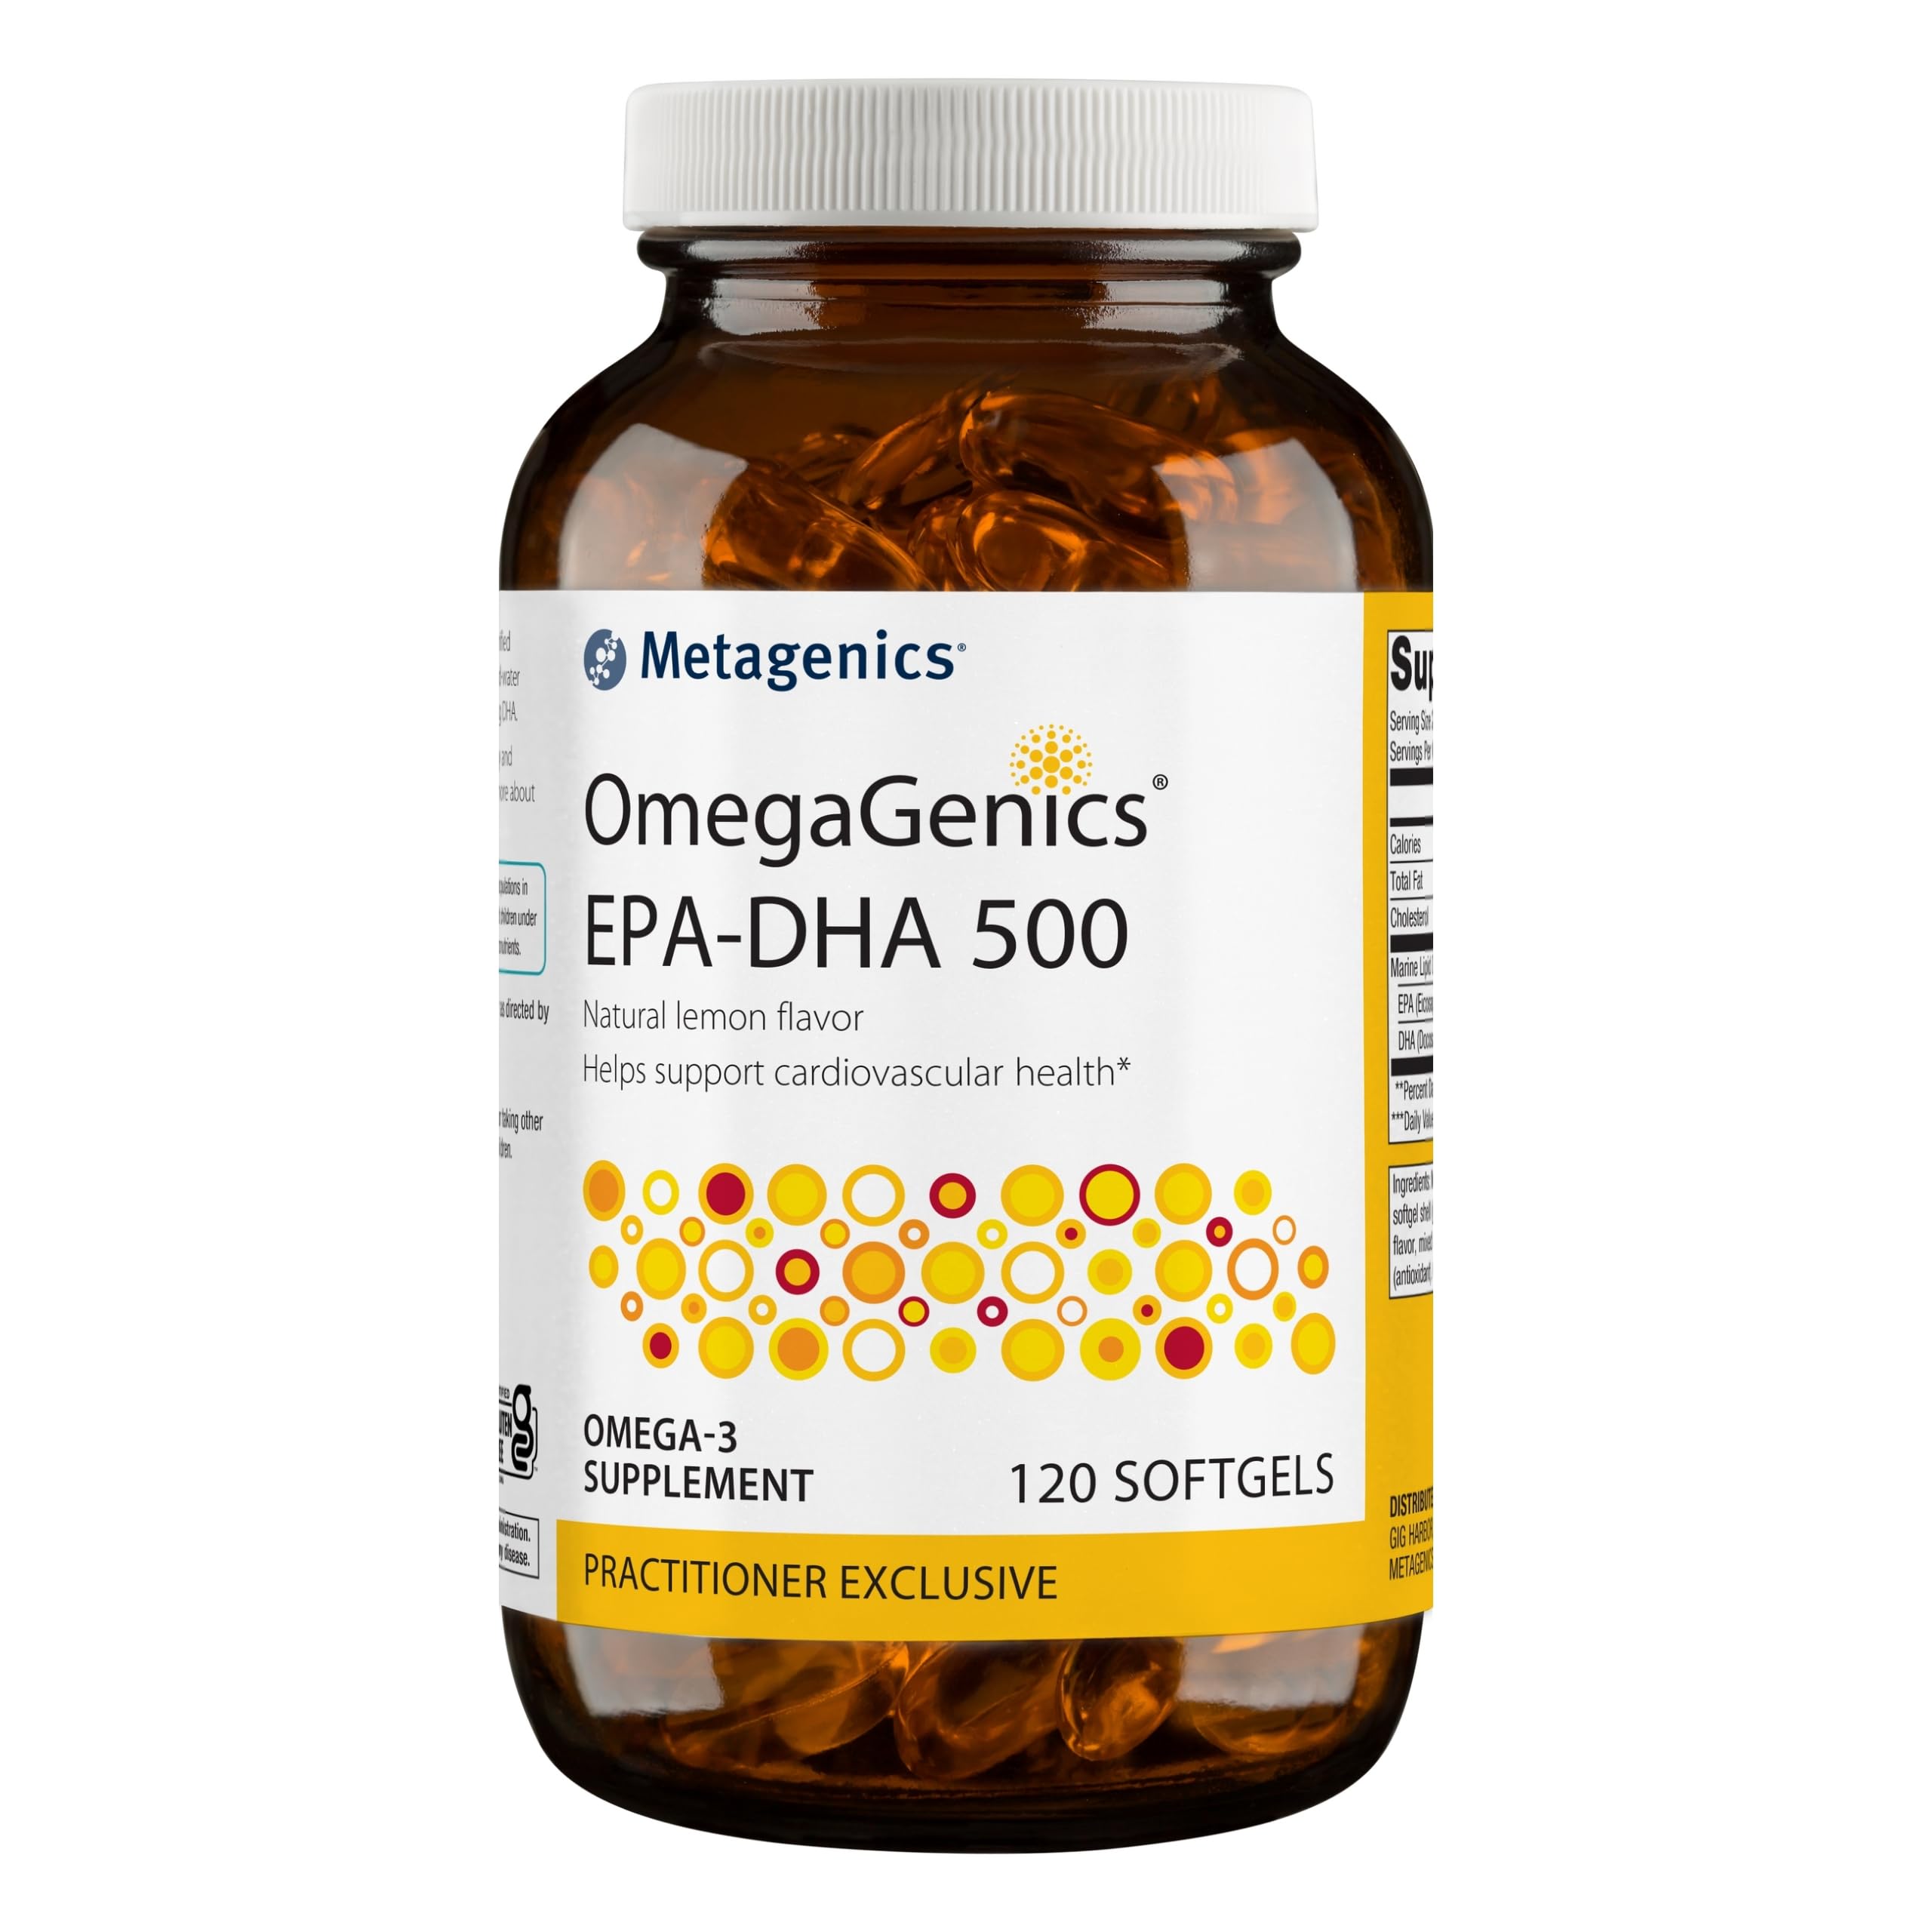 Metagenics OmegaGenics EPA-DHA 500 - Supports Cardiovascular Health* - Fish Oil EPA DHA - Purity & Quality Tested - Non-GMO & Gluten-Free - 120 Count